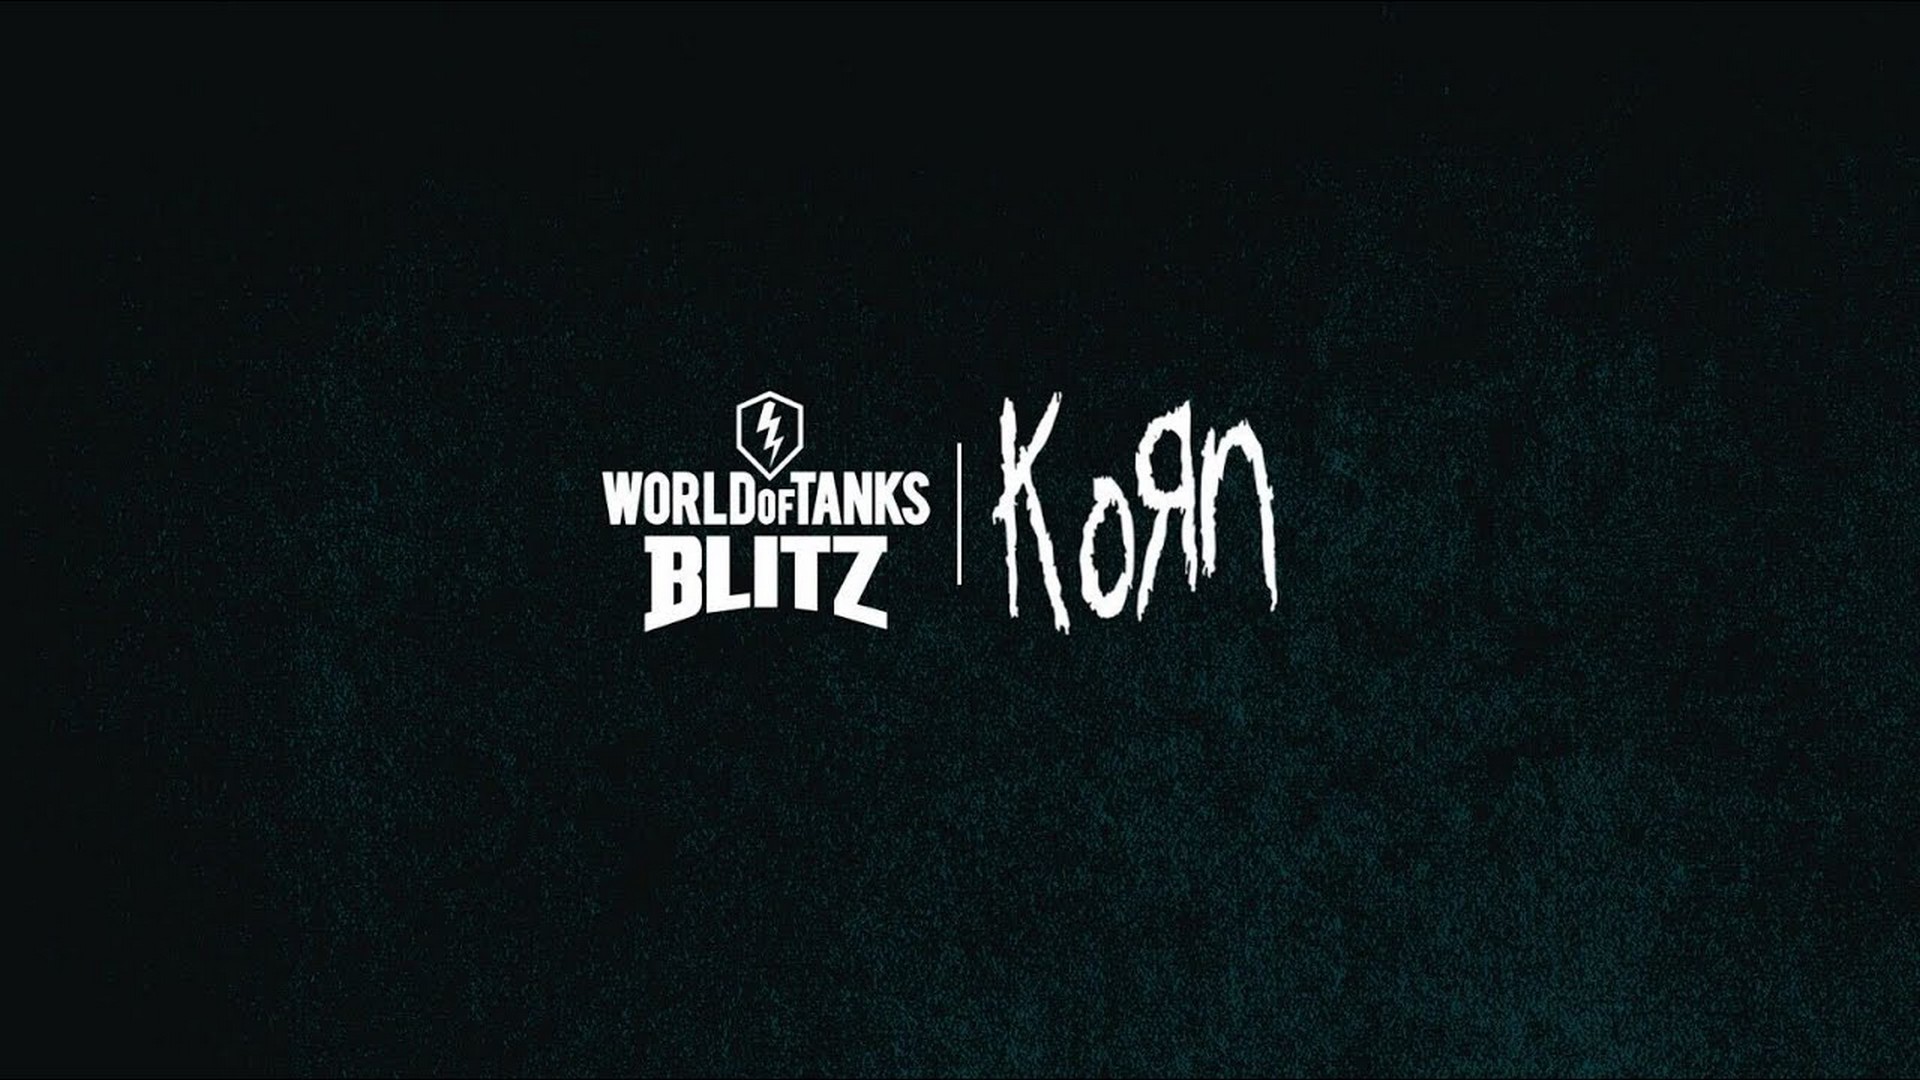 Iconic Band Korn Joins Forces With World of Tanks Blitz For Halloween Event